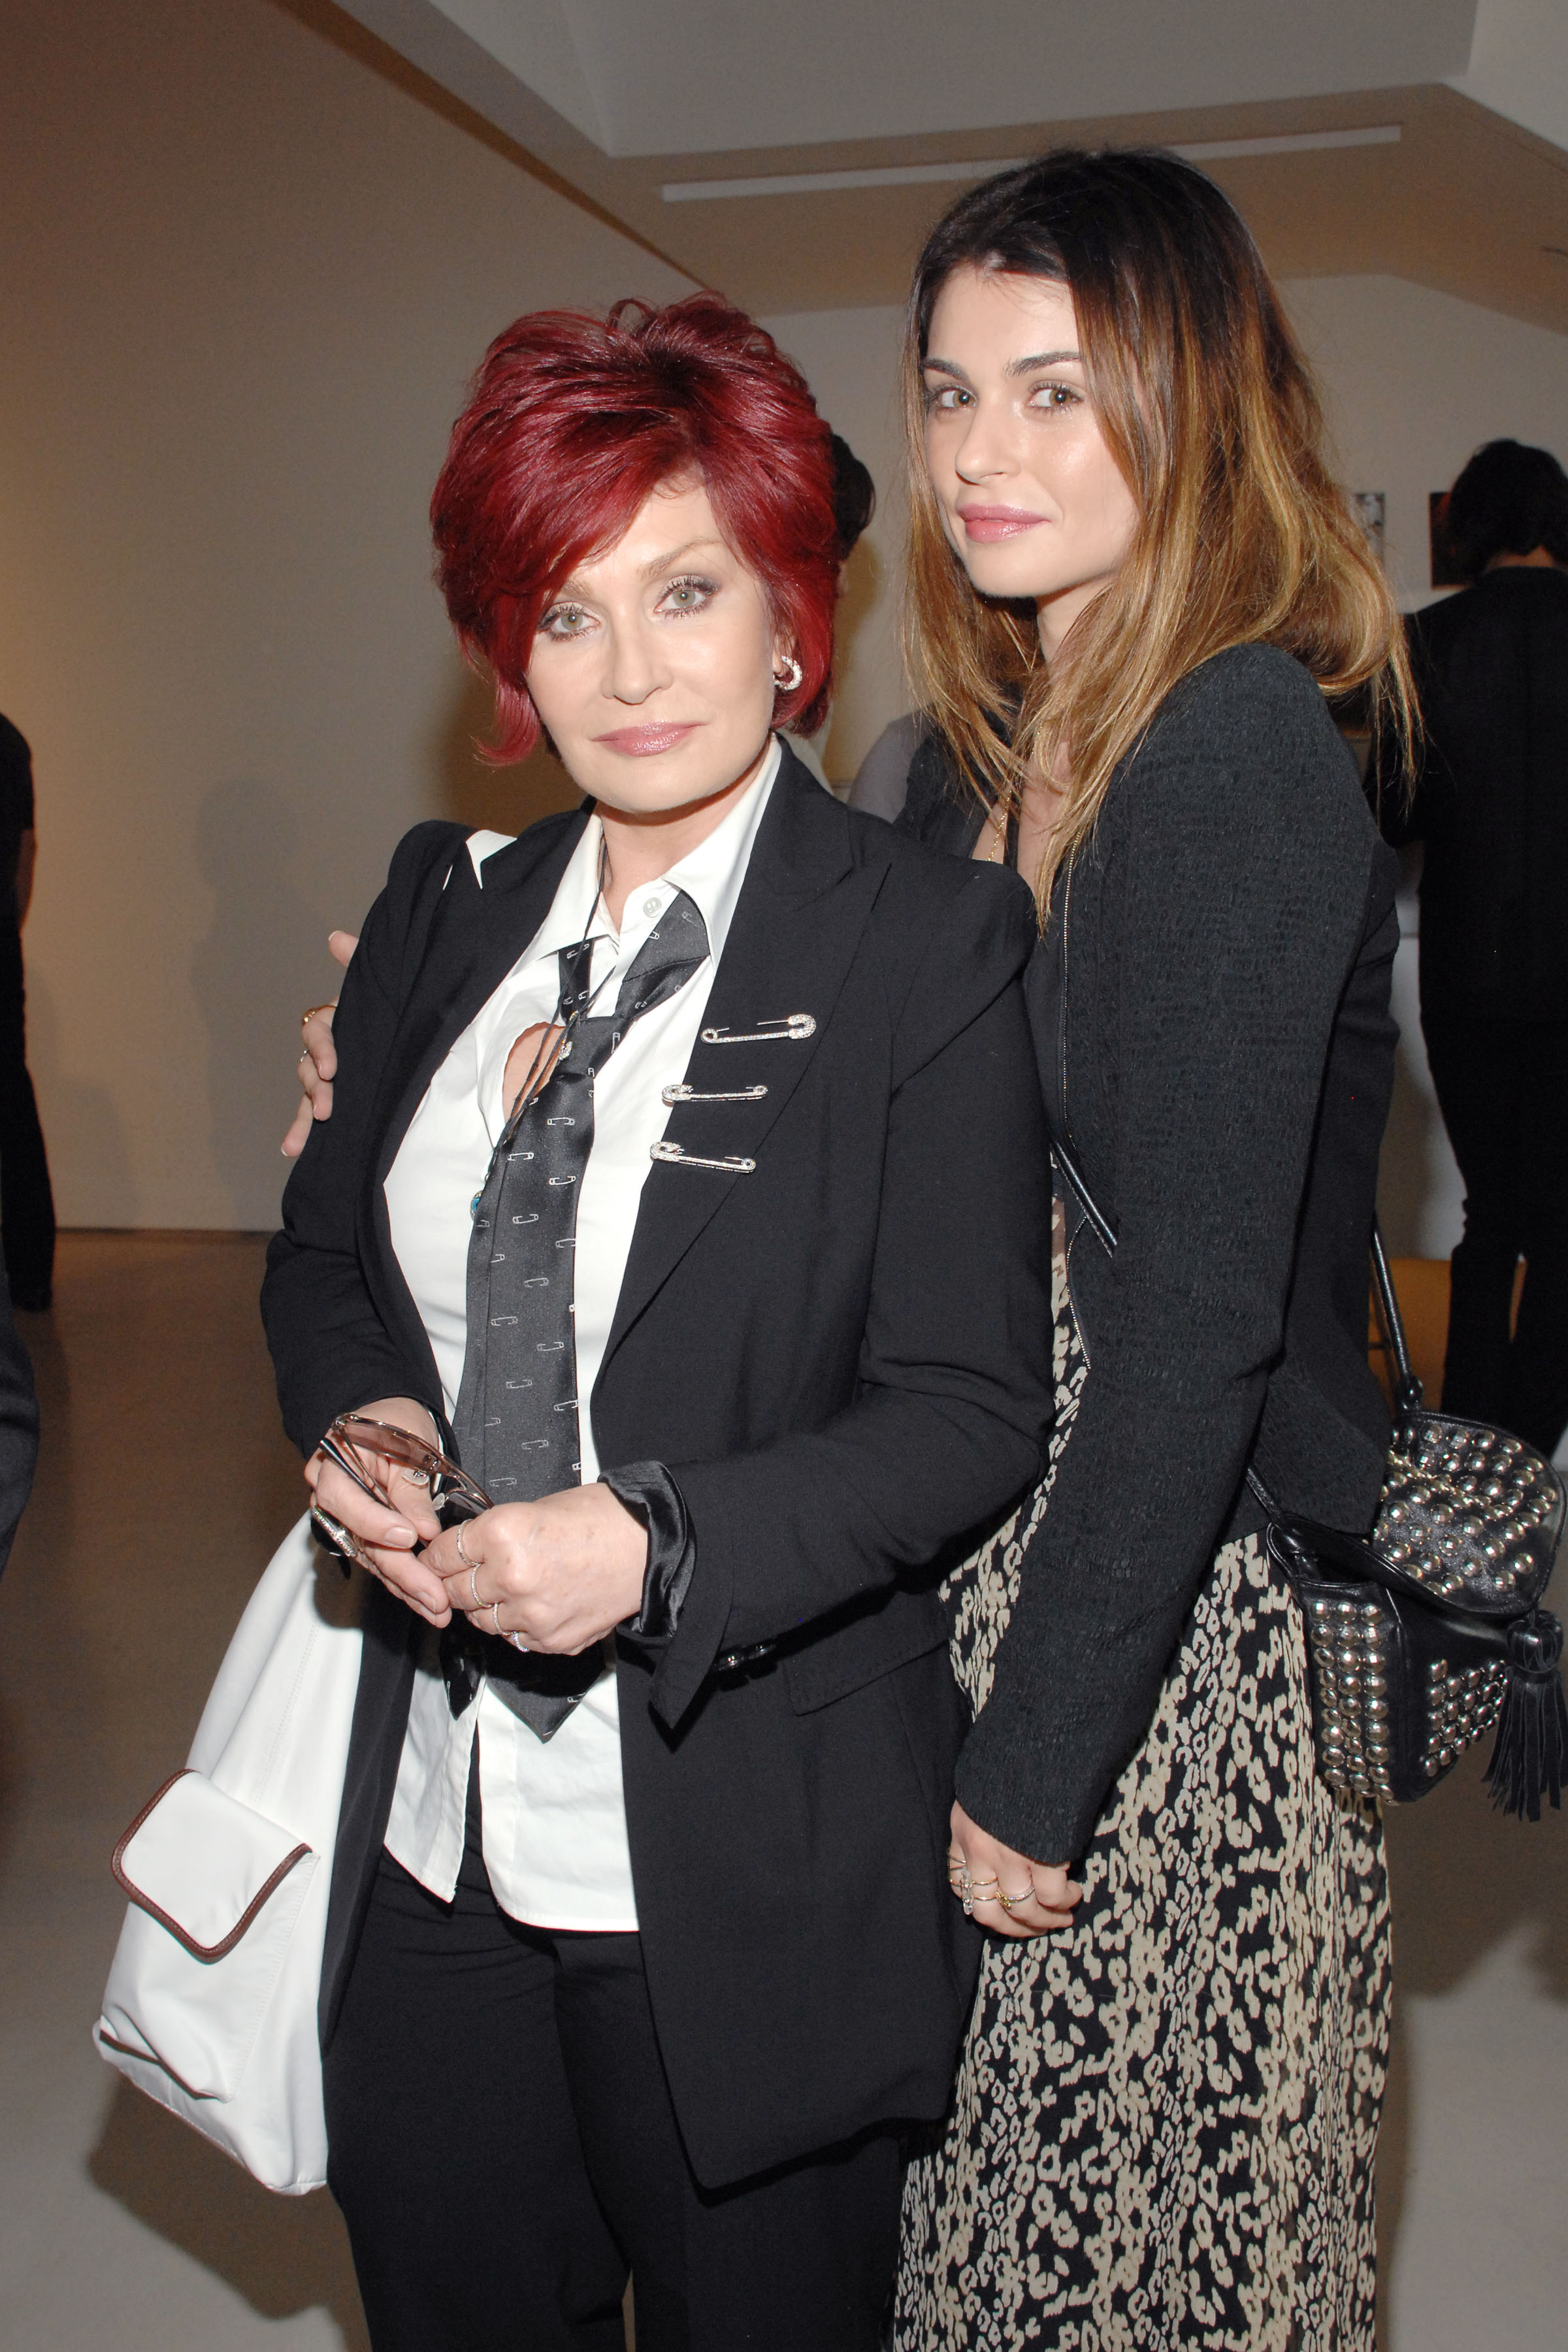 Sharon and Aimee Osbourne at the PRISM : Andy Warhol Black & White event in West Hollywood, California on June 4, 2010 | Source: Getty Images